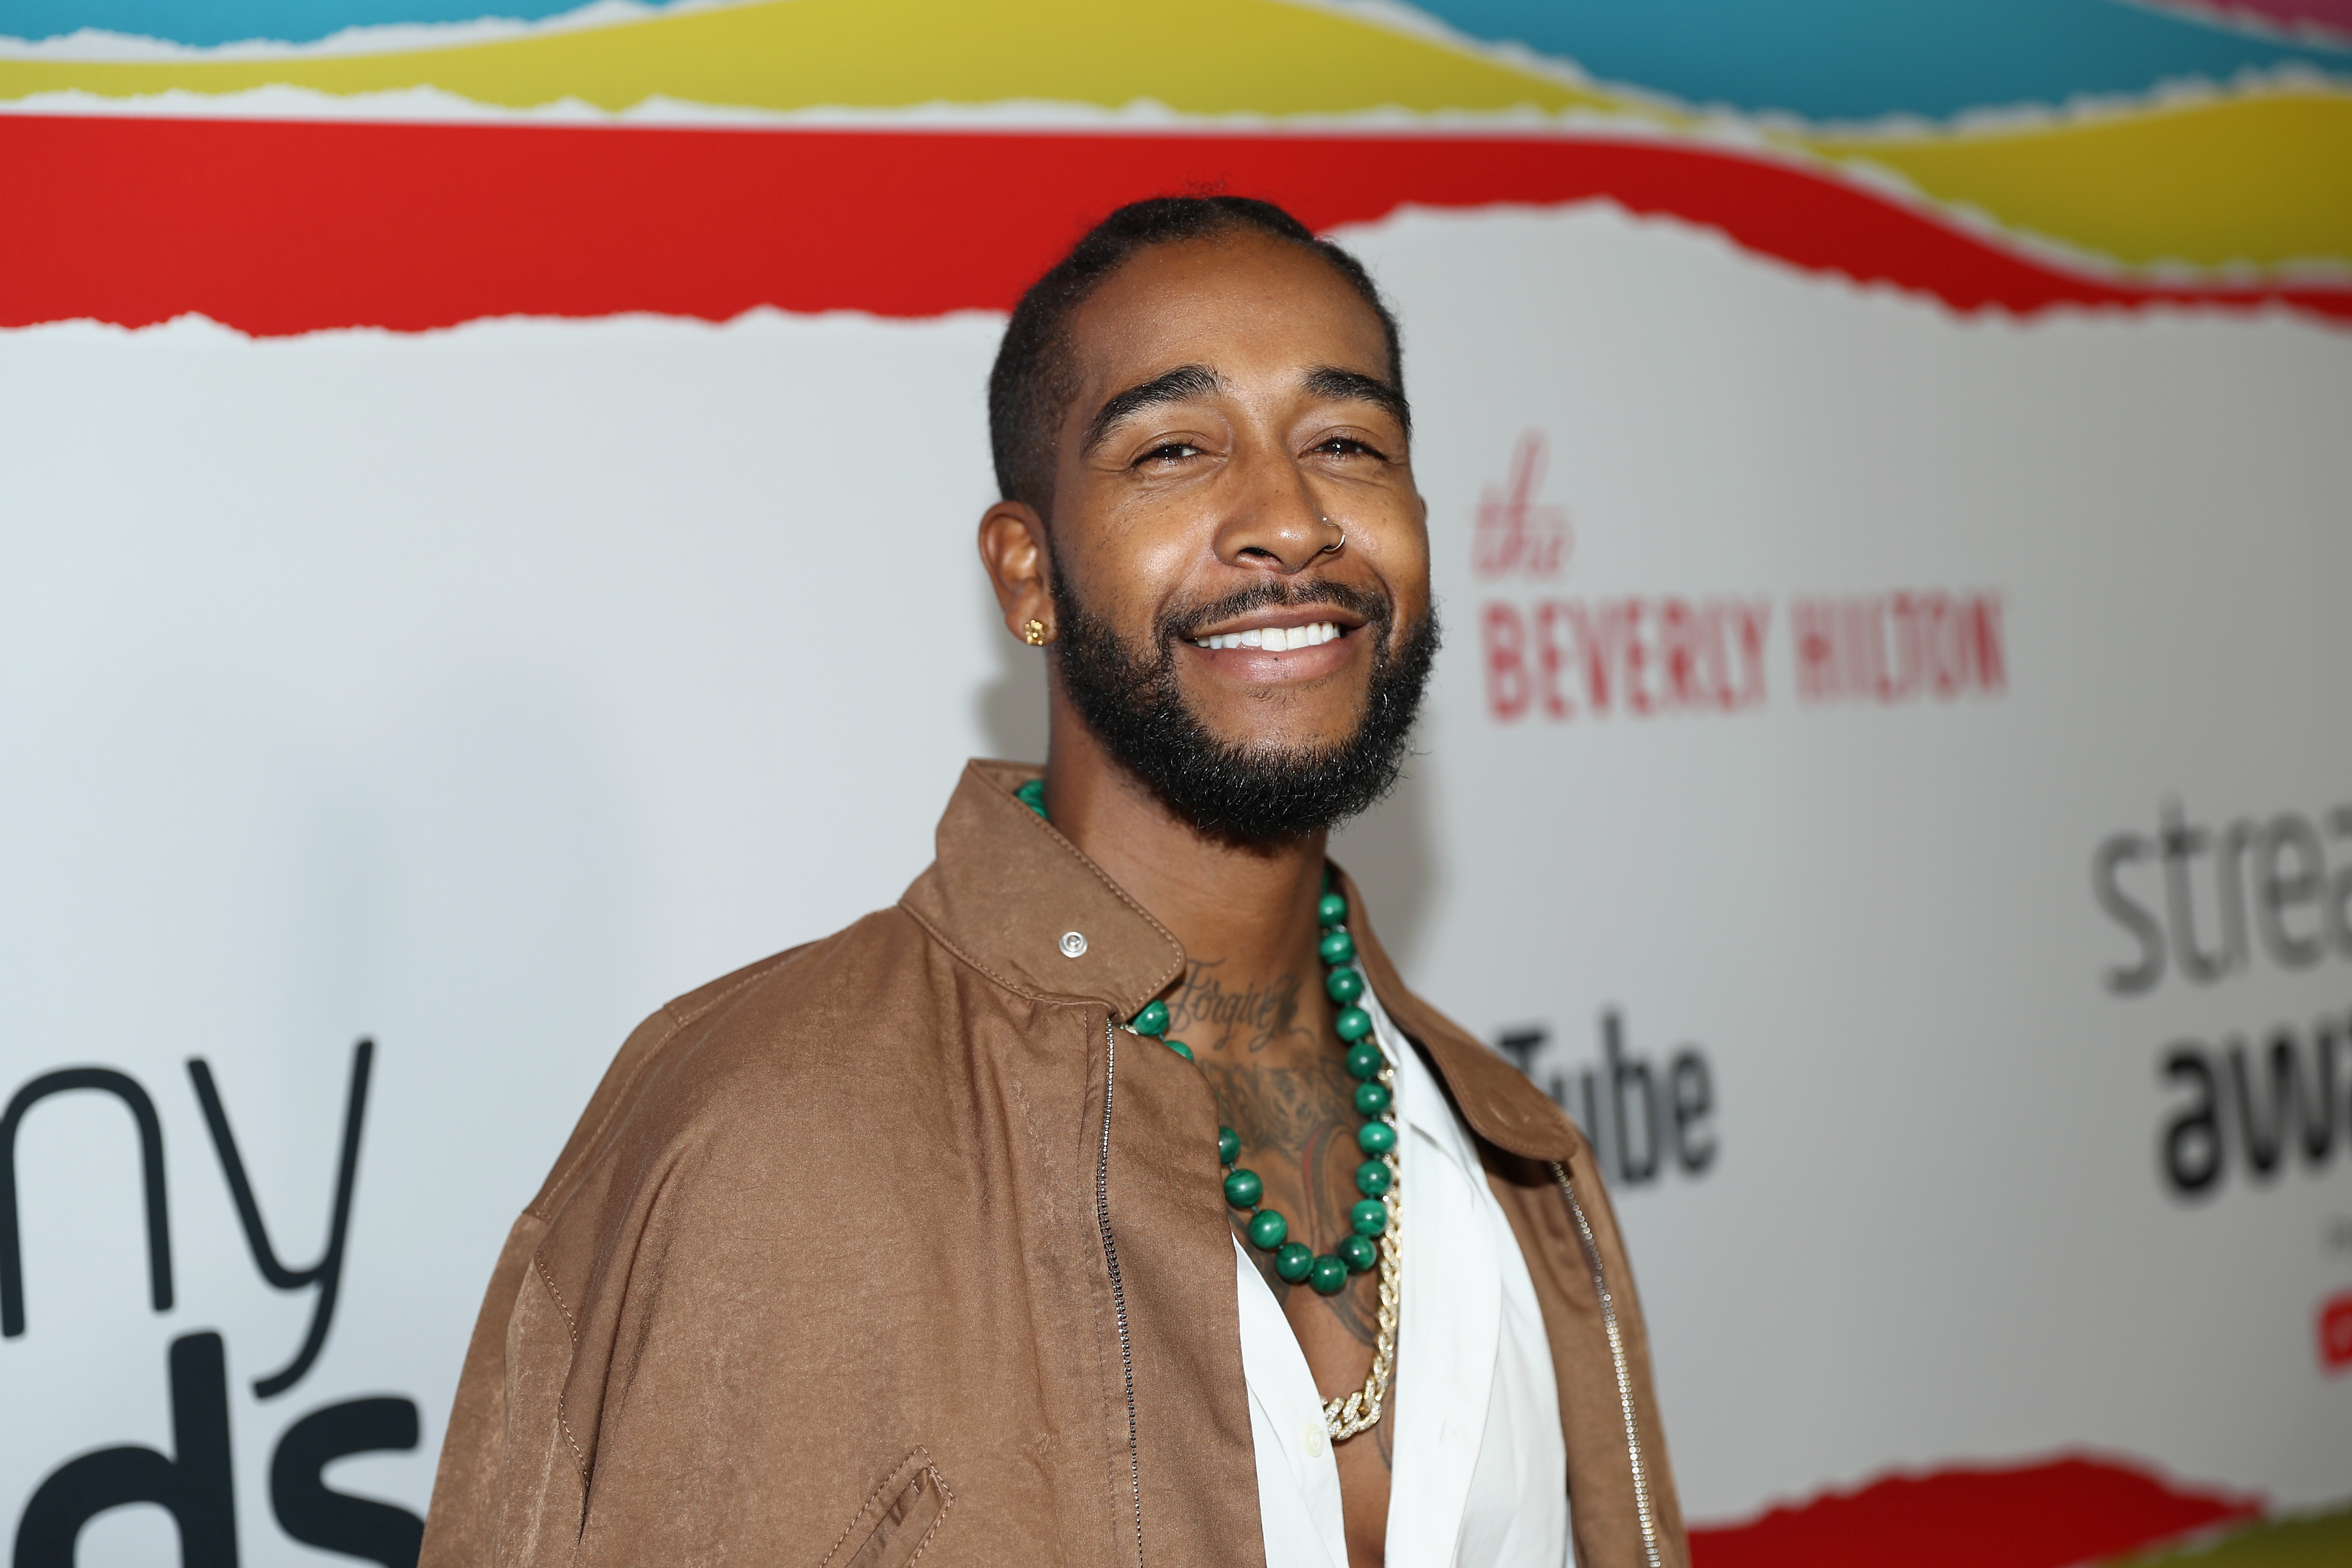 Exclusive: Omarion Donates Care Packages To Overlooked Essential Workers.